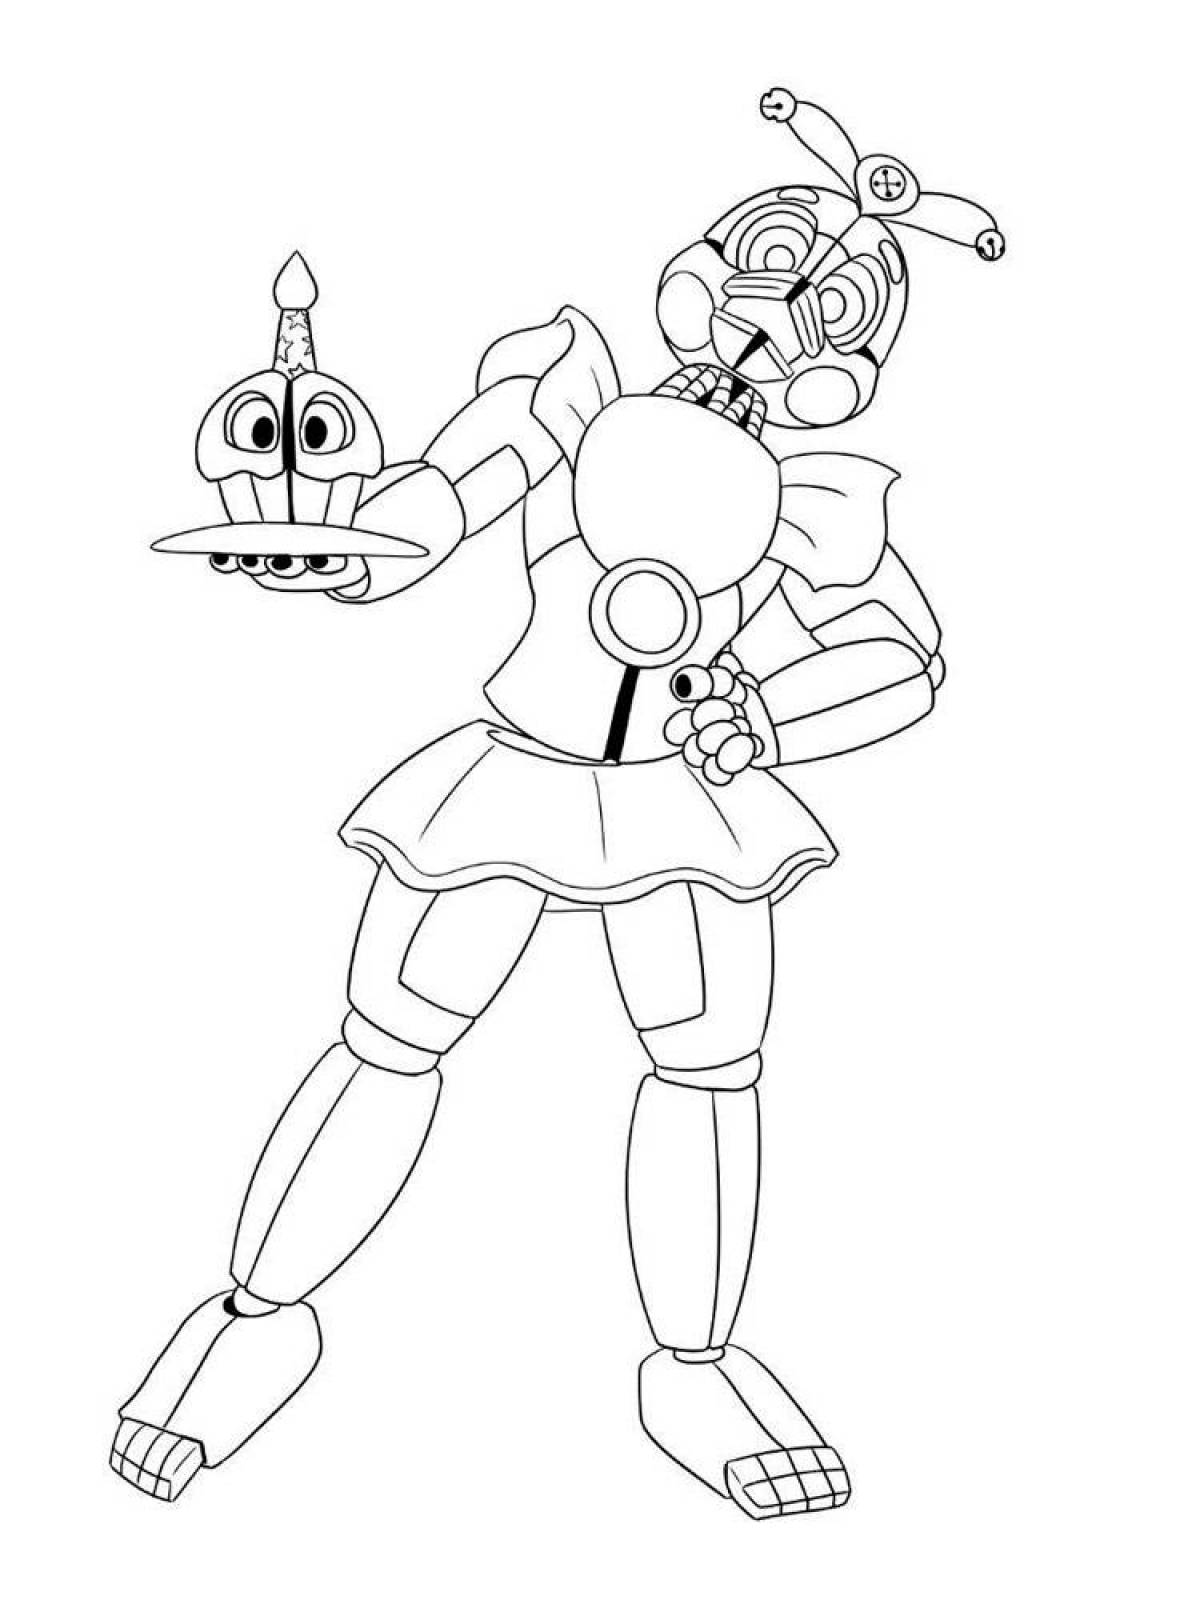 Coloring book shining chica